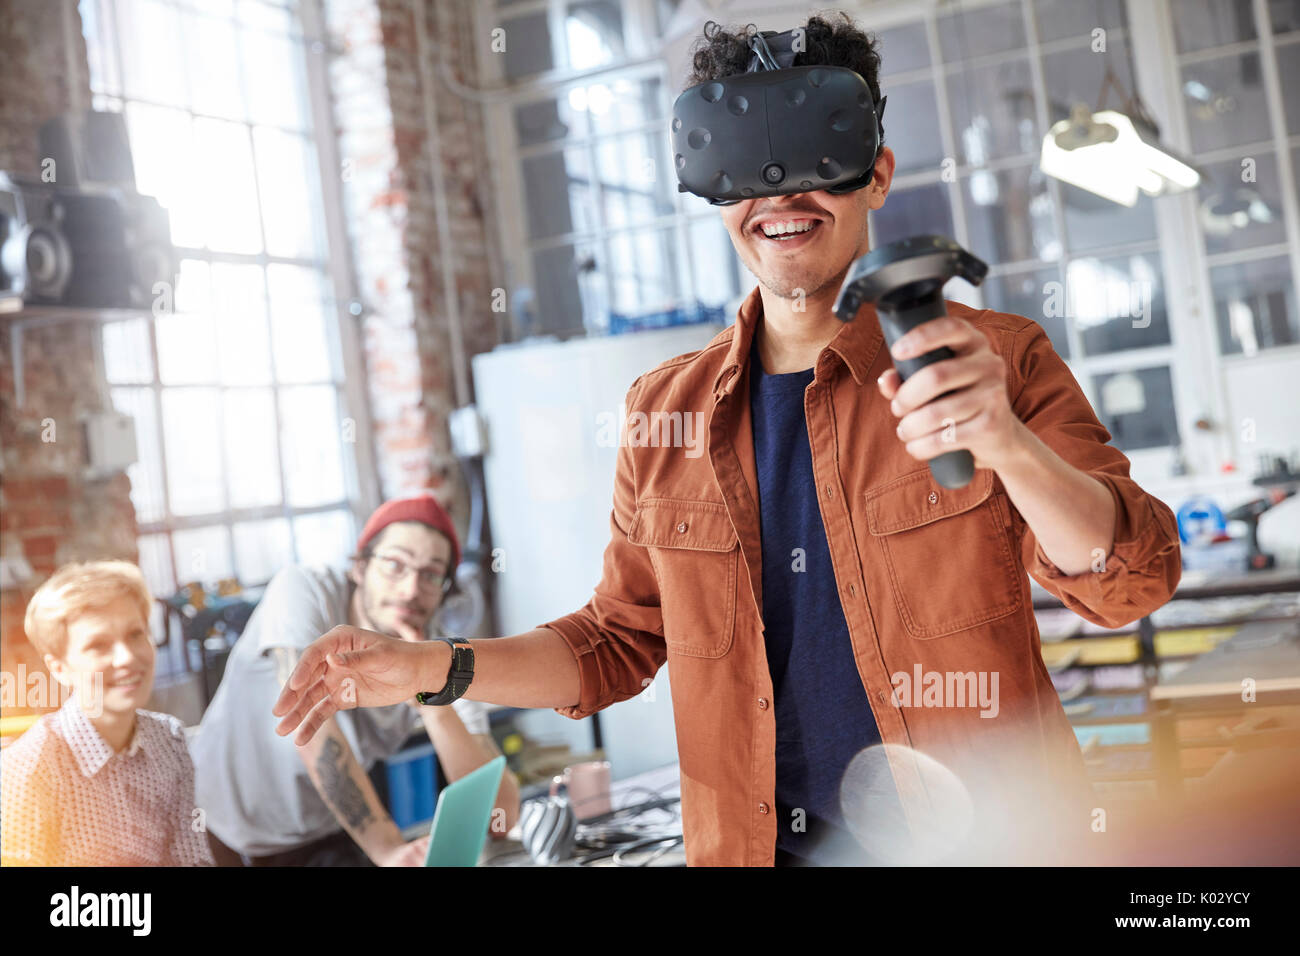 Smiling male computer programmer texting virtual reality simulator glasses and joystick in workshop Stock Photo